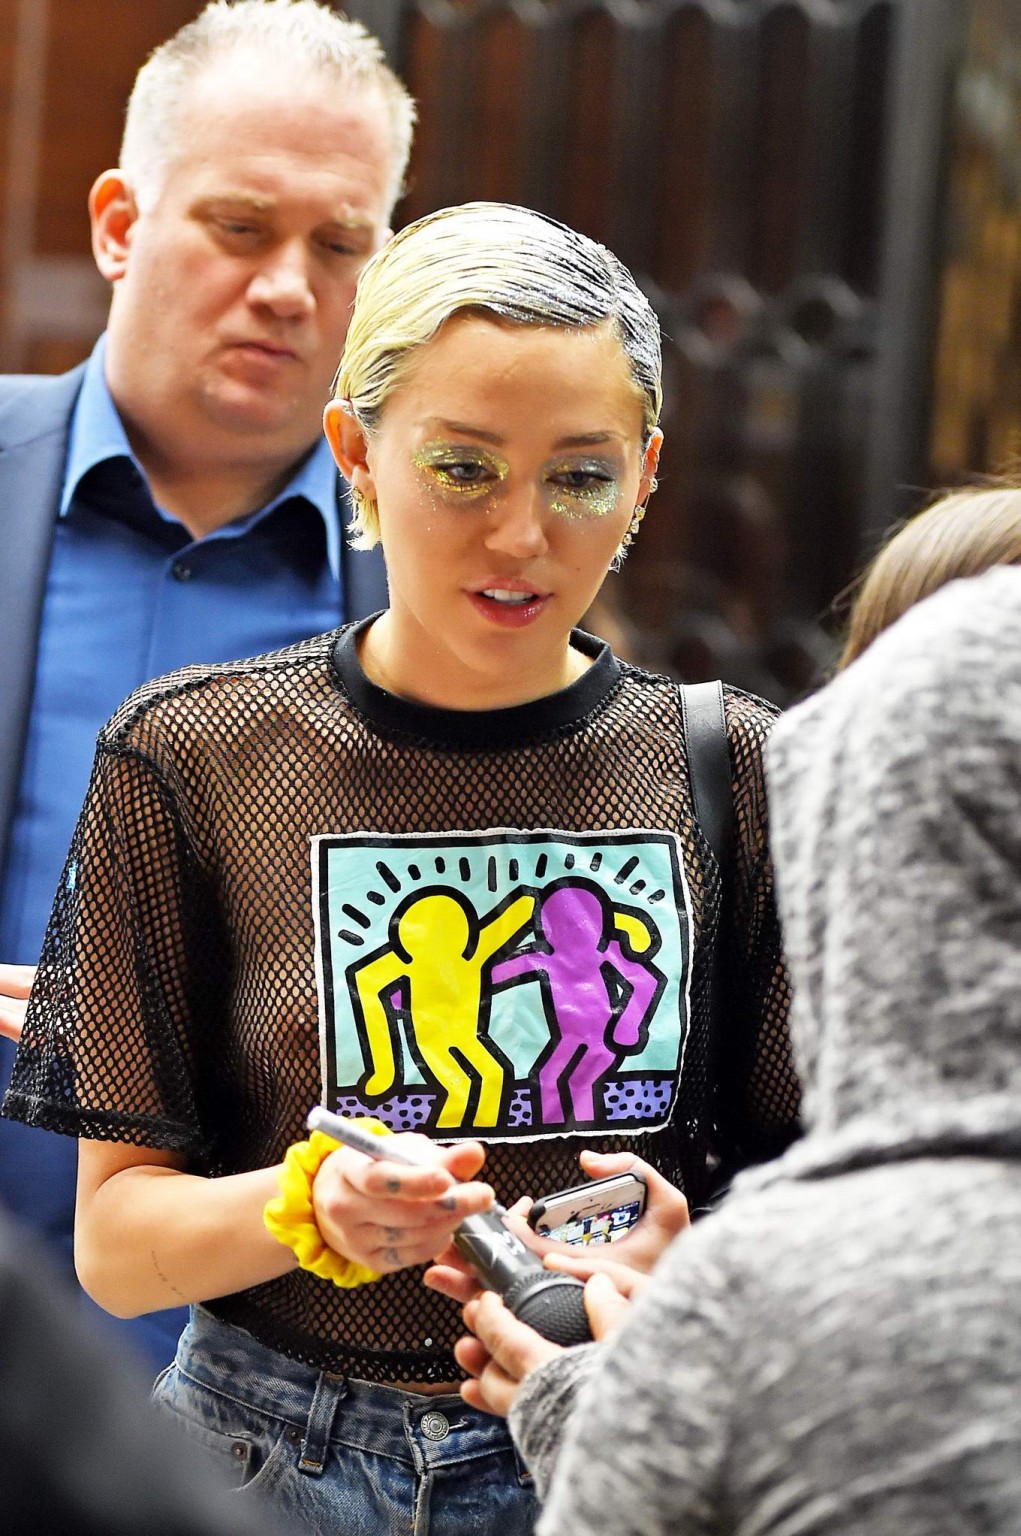 Miley Cyrus shows off her boobs wearing a mesh Tshirt out in NYC #75164253